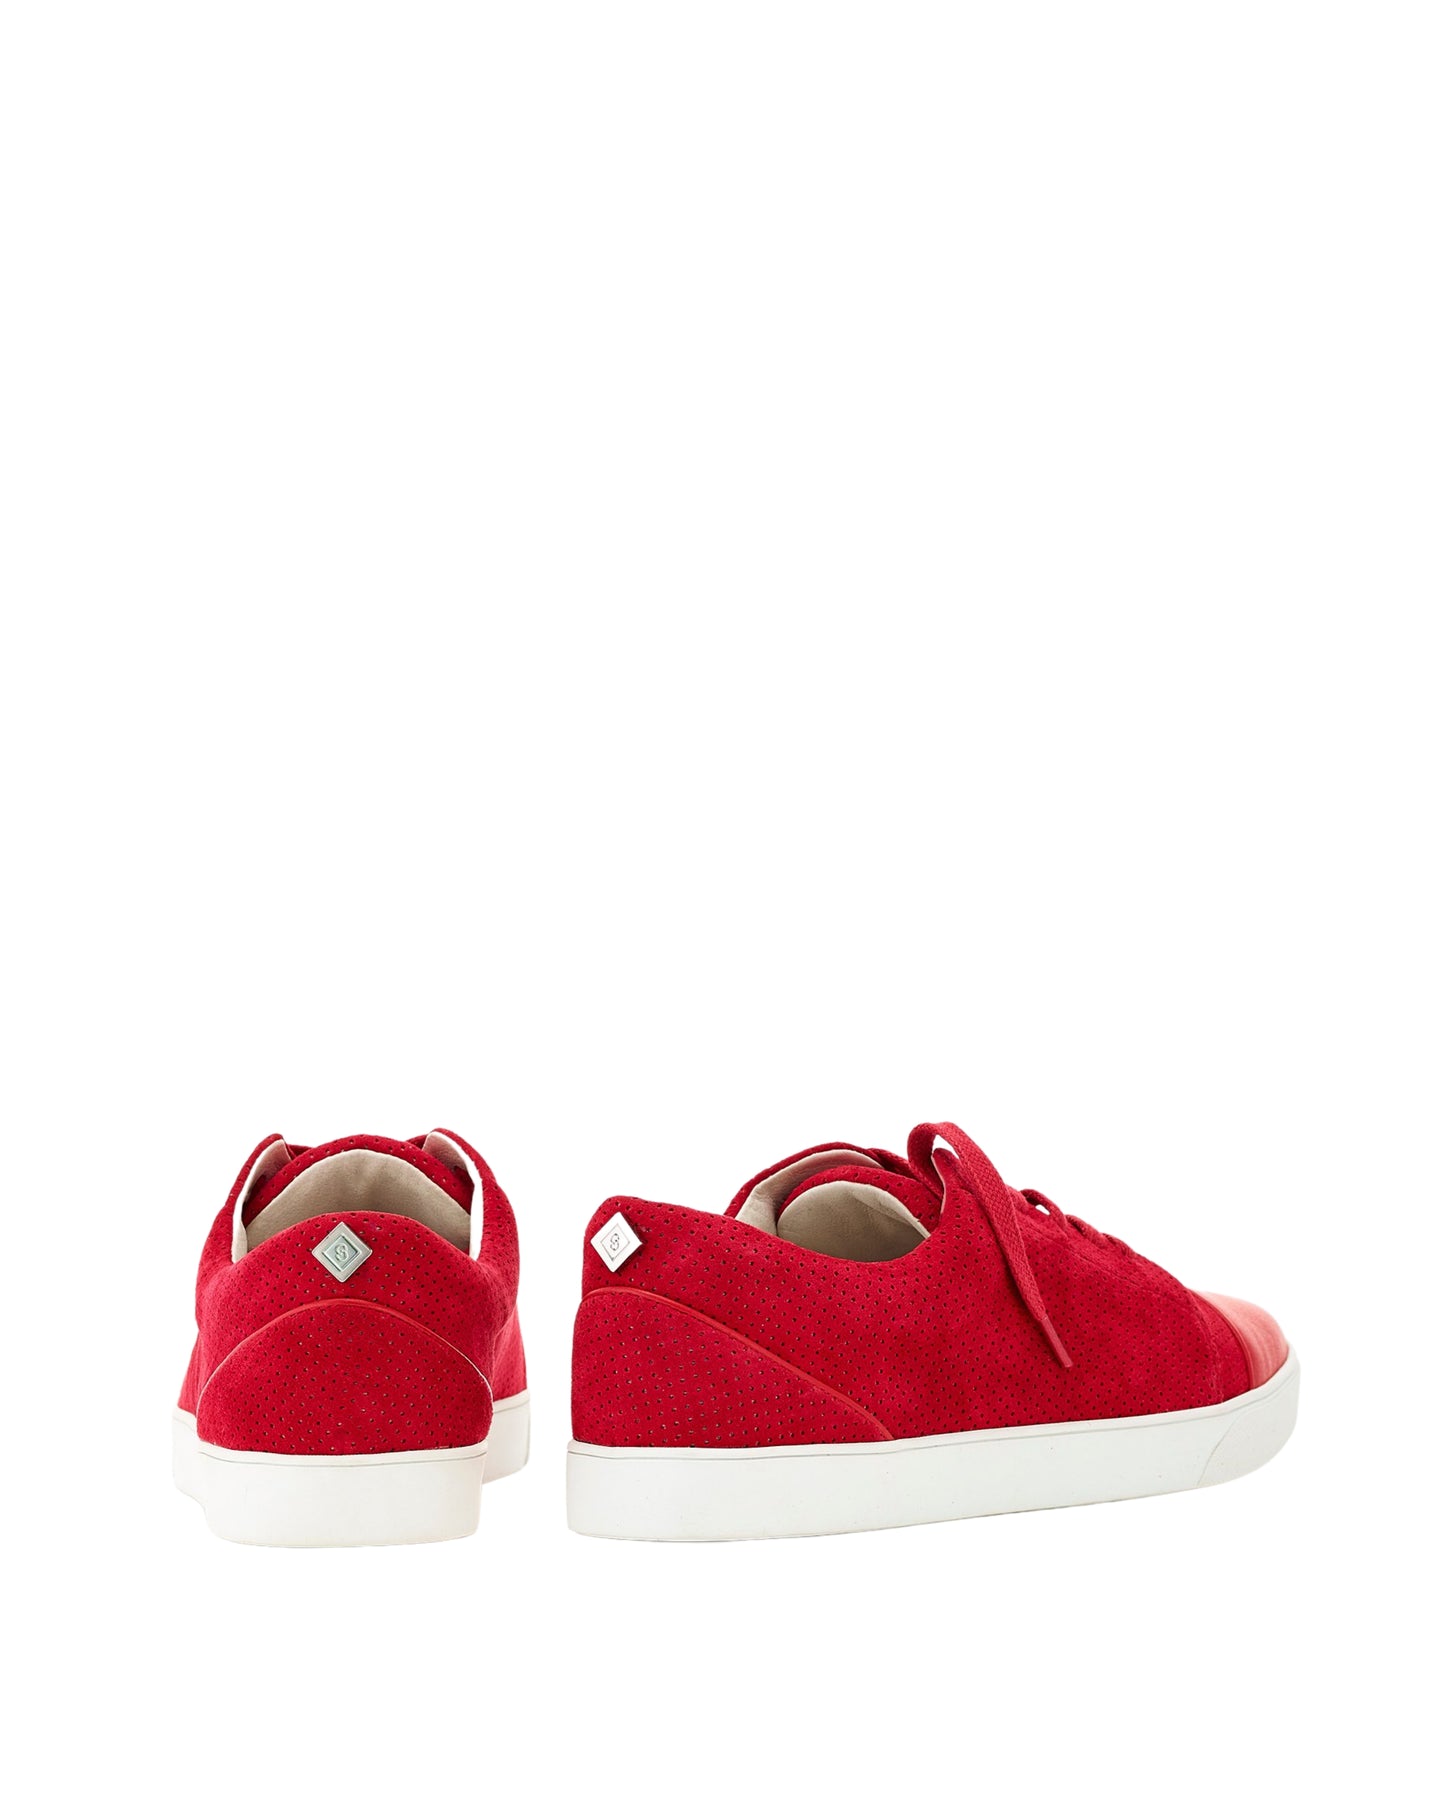 Eye catching red suede sneaker for women --The – Cocktail Sneakers